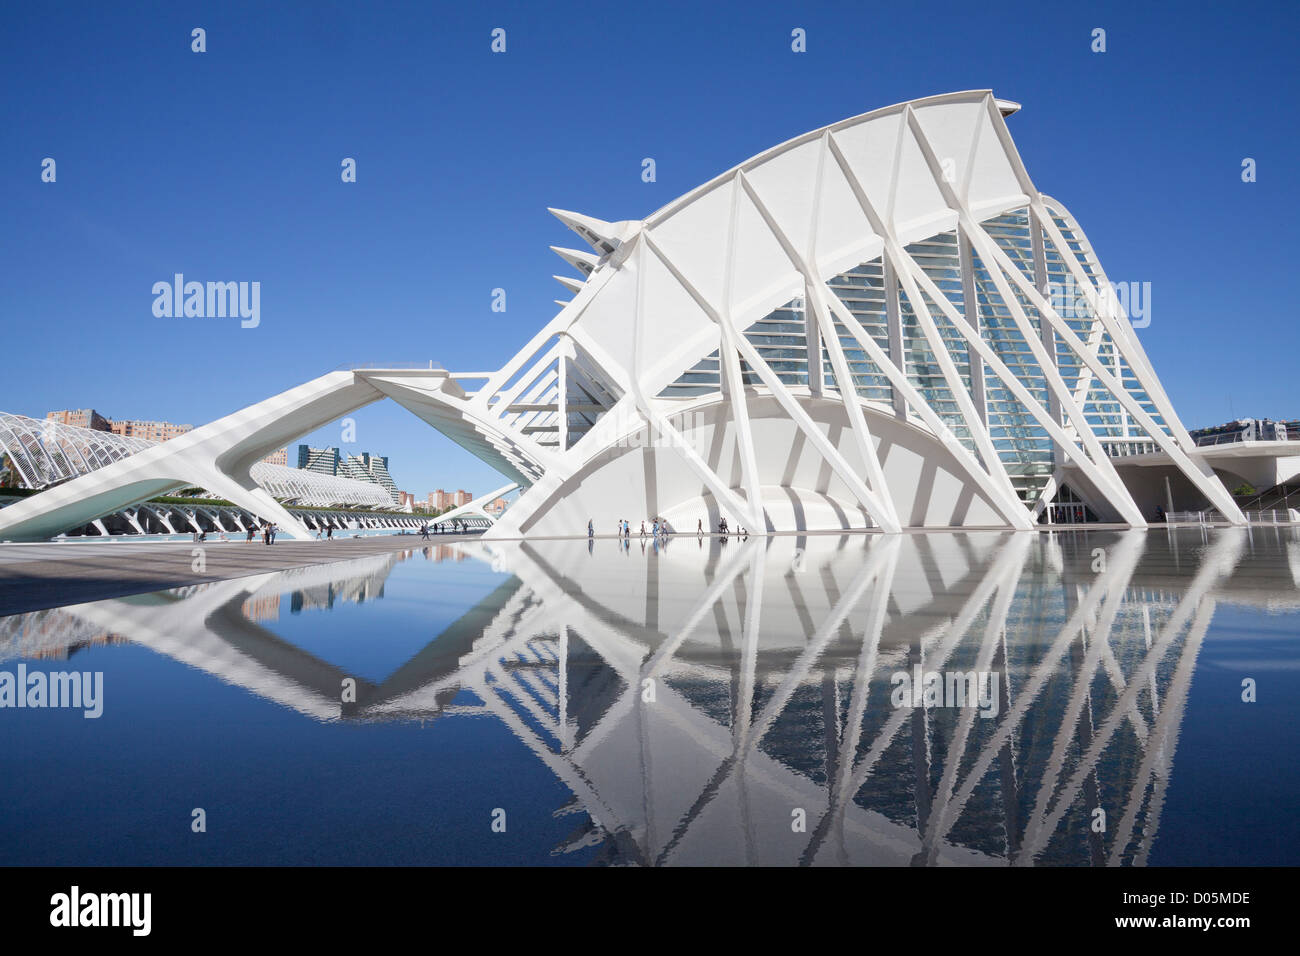 The Science Museum at the City of Arts & Sciences, Valencia. Stock Photo